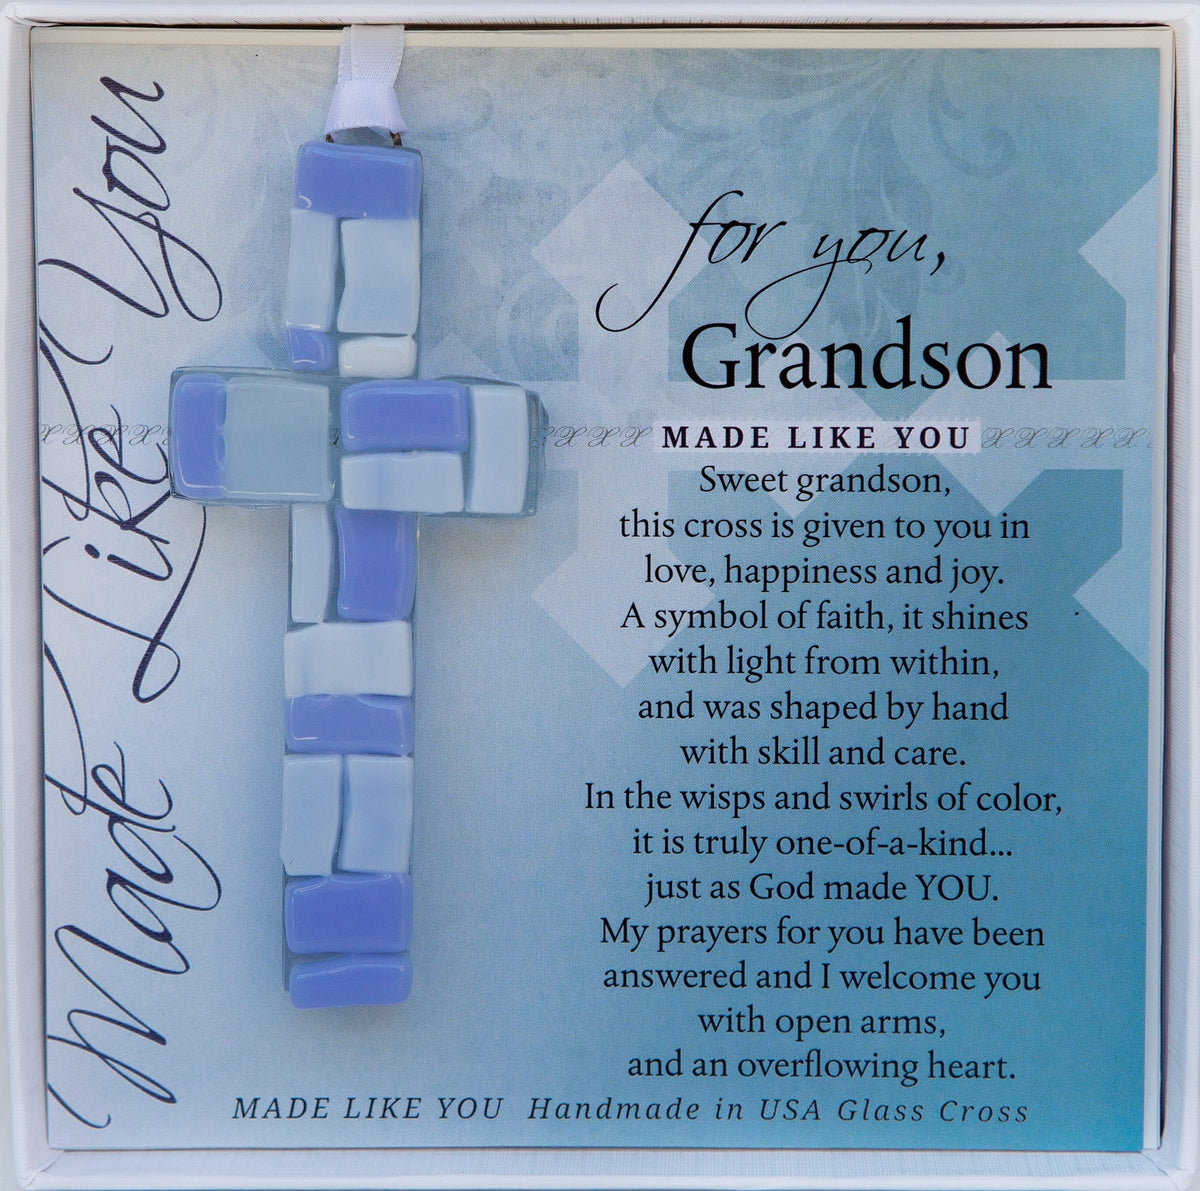 Grandson Gift - Handmade 4" blue mosaic glass cross and "For You, Grandson" sentiment in white box with clear lid.